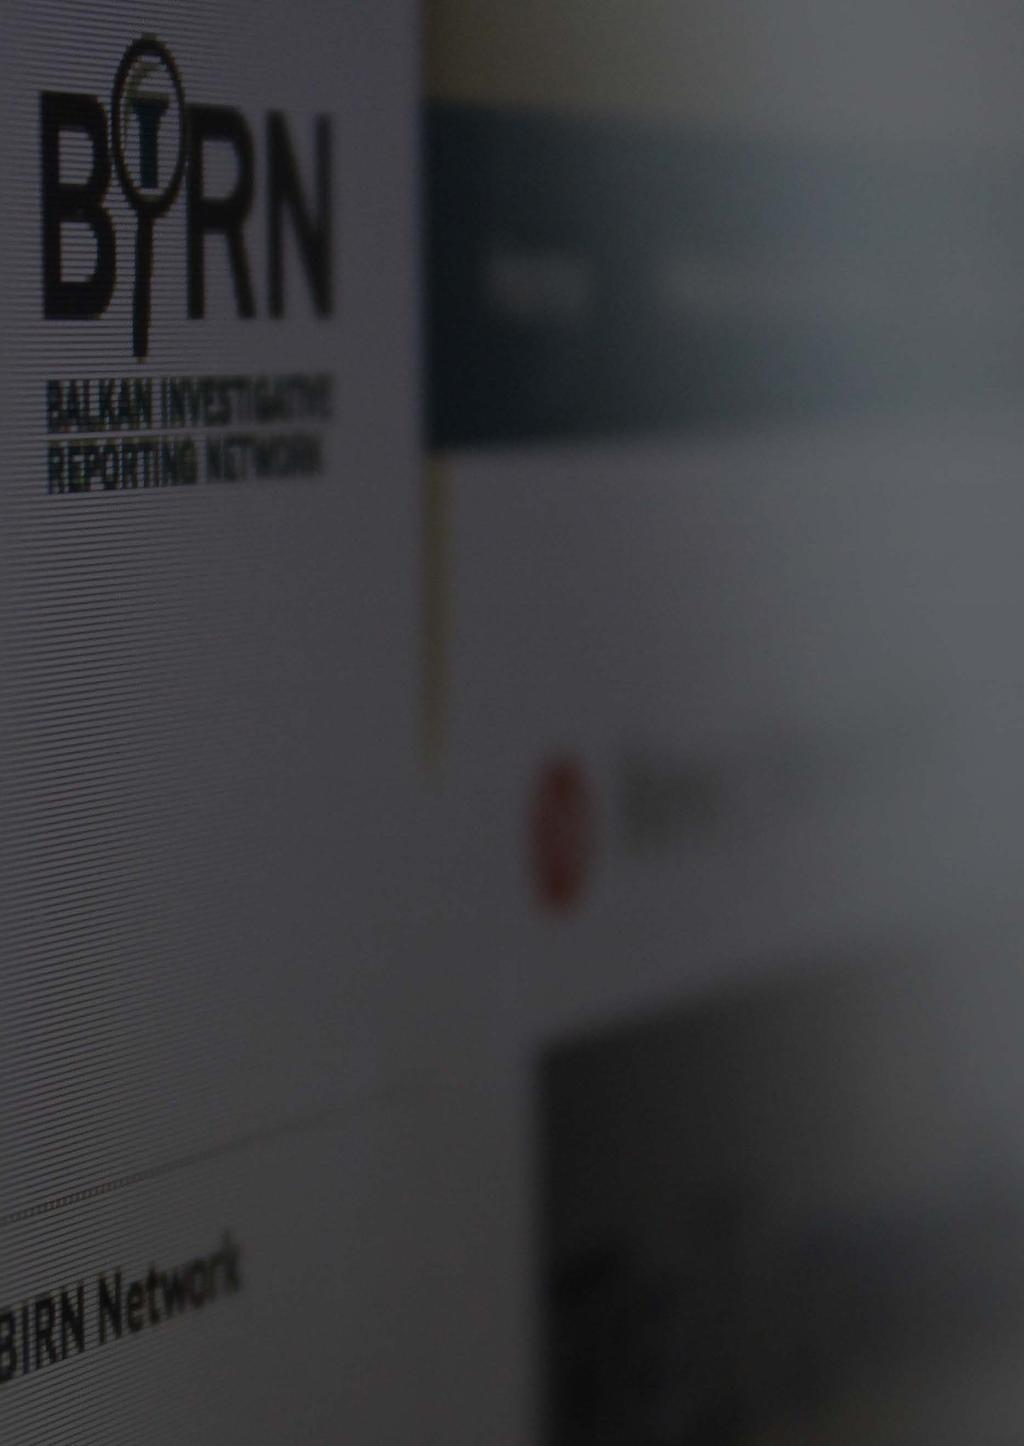 ABOUT 37 About BIRN The Balkan Investigative Reporting Network (BIRN) is the leading investigative reporting organisation in the Balkans, and is a trusted and well-respected civil society actor in